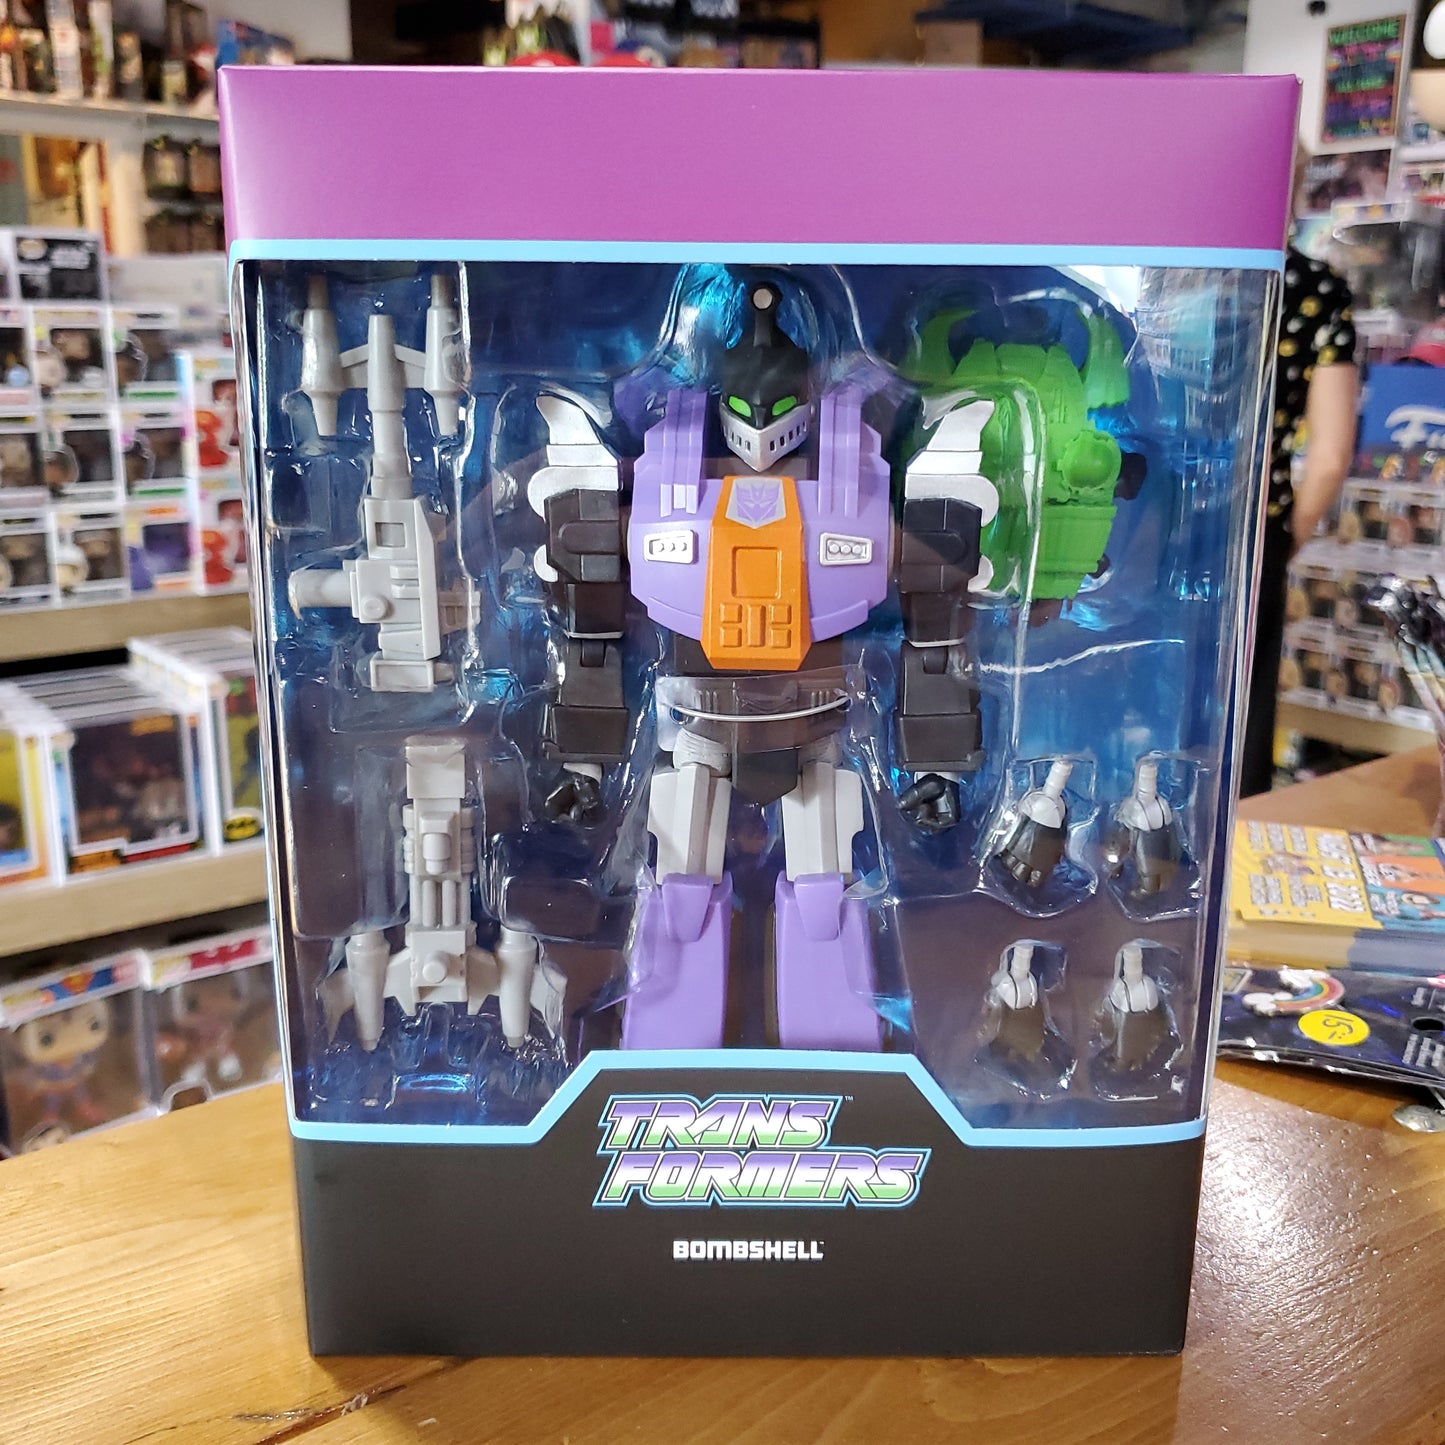 Bombshell - Transformers - Super 7 Ultimates Action Figure